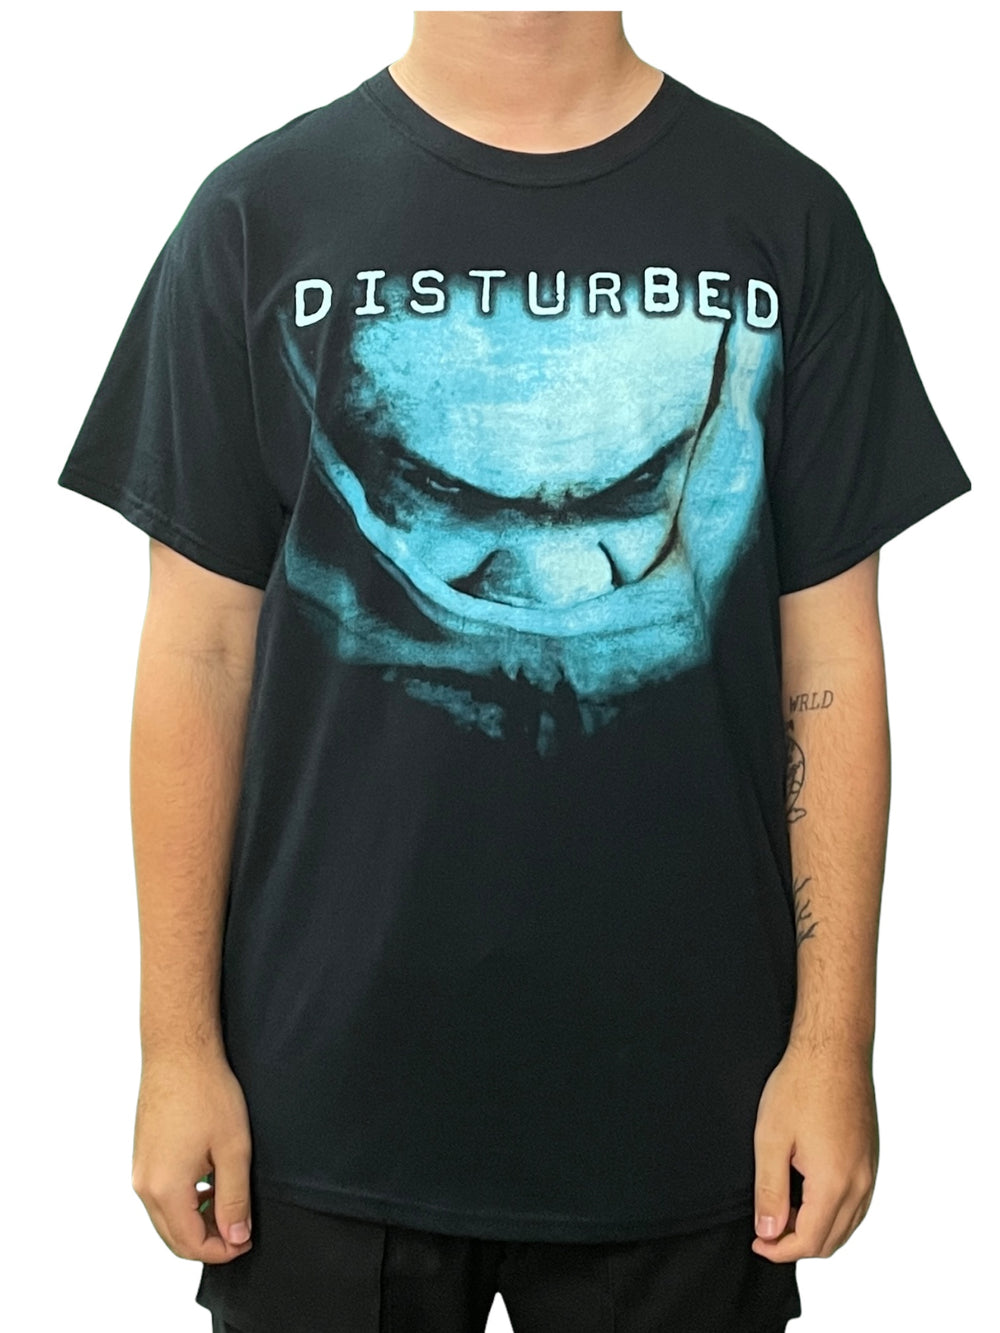 Disturbed Sickness Official Unisex T Shirt Brand New Various Sizes